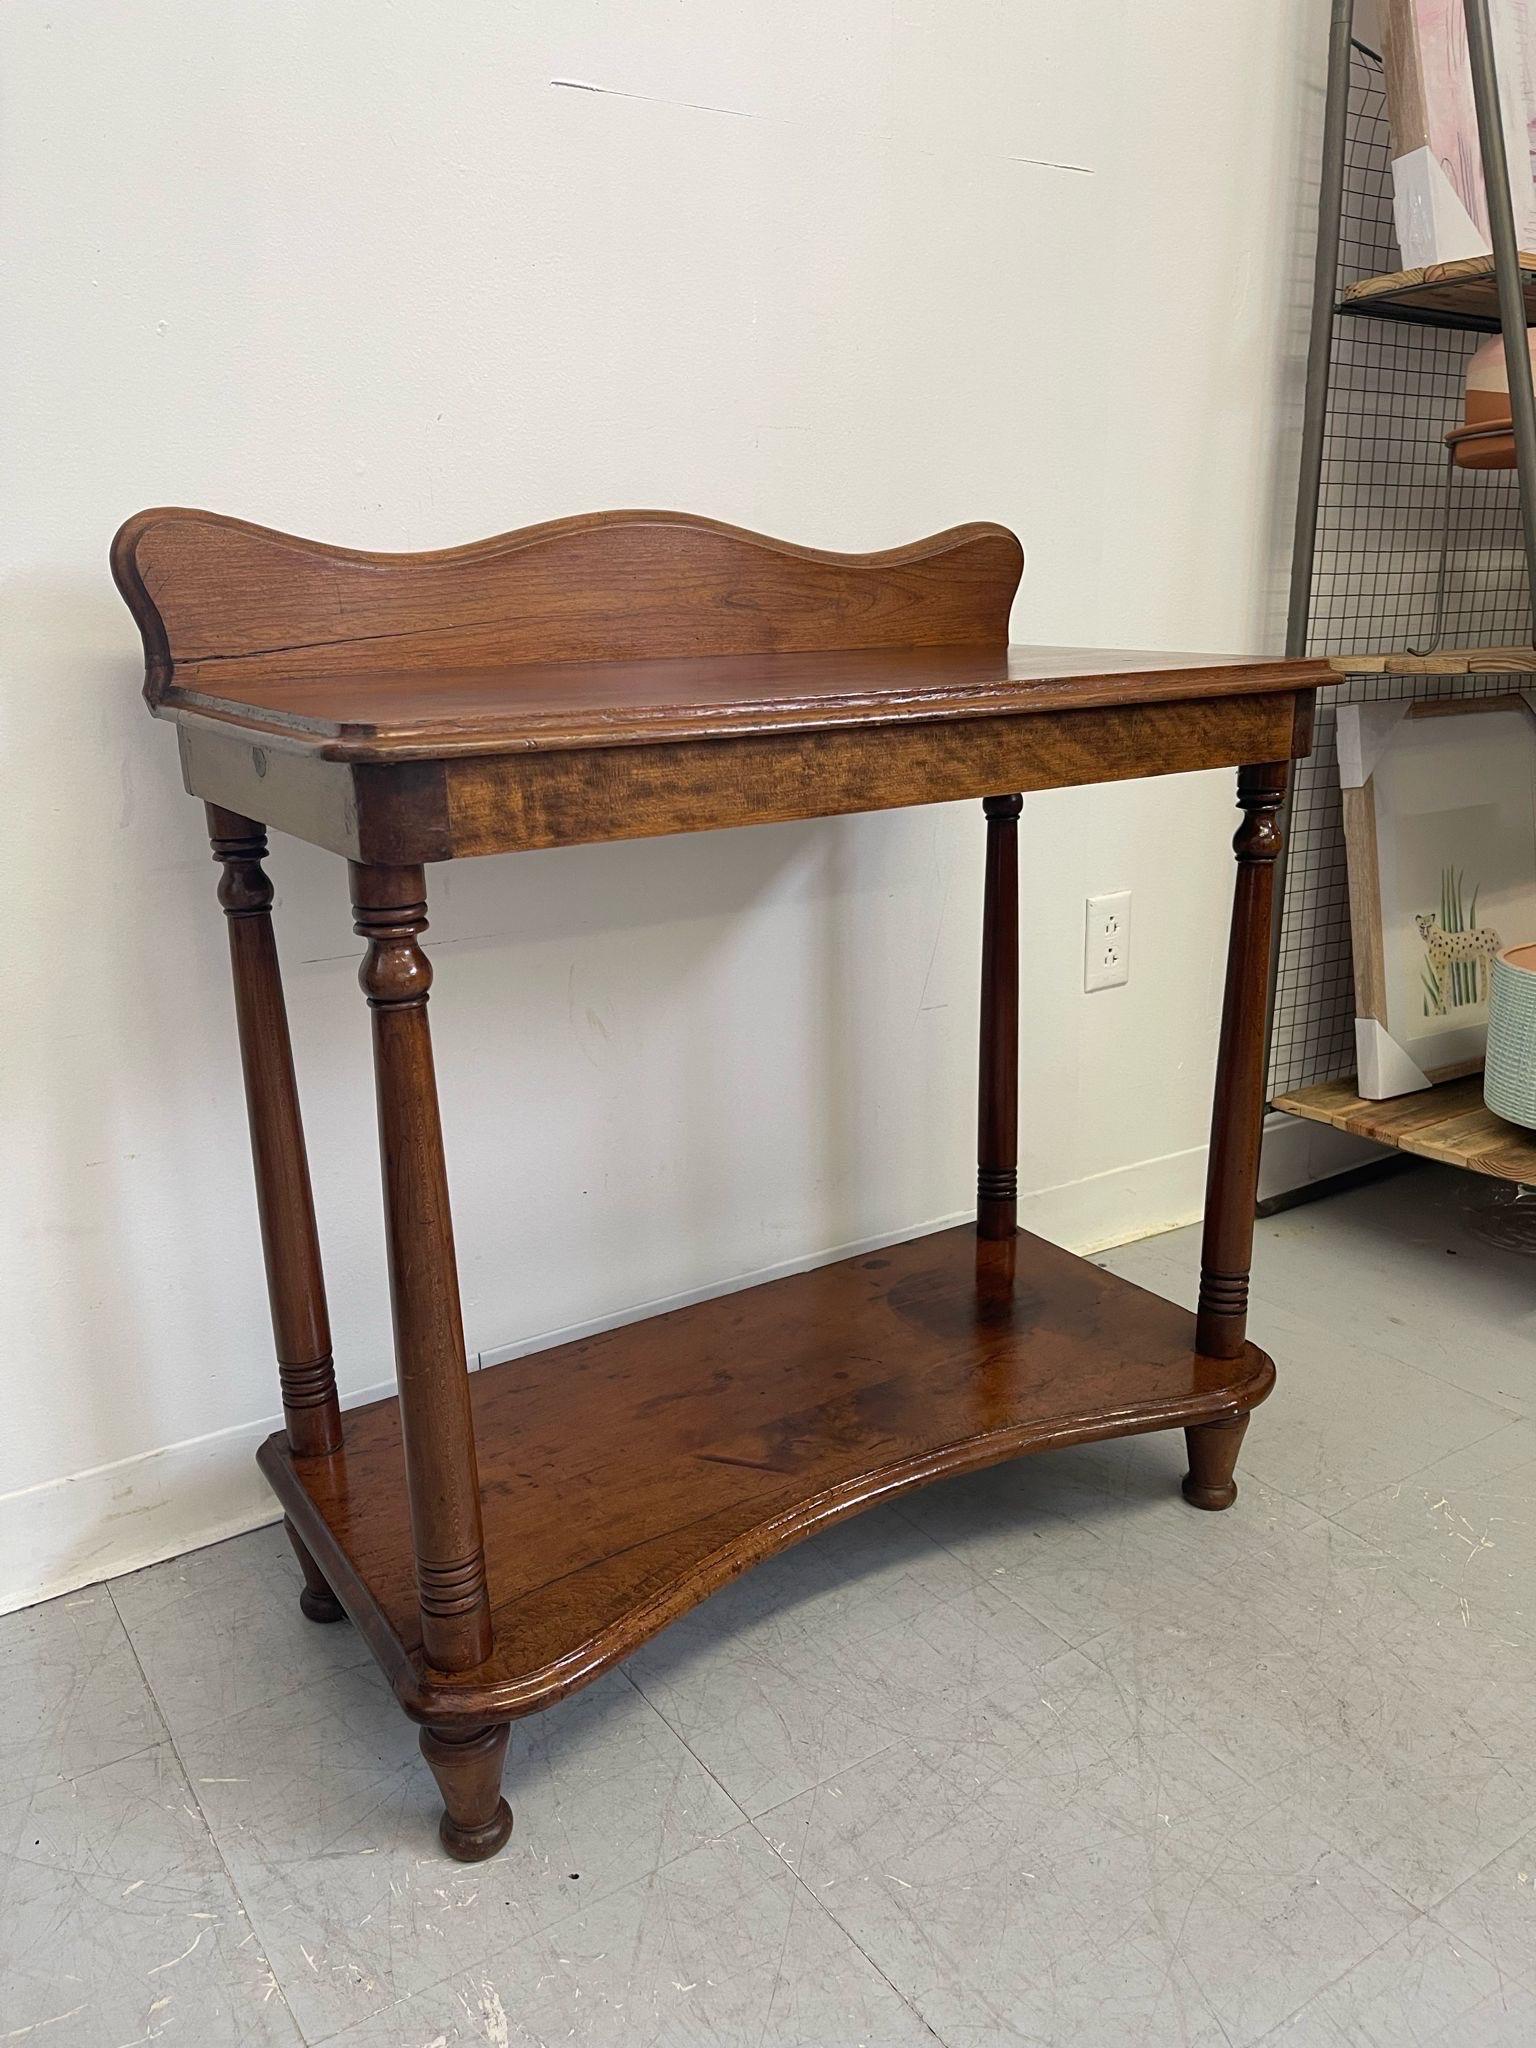 This Table has Curved wood back and curved front to the lower shelf. Attached receipt from 1977 states that the Table is made from Cherry wood circa1850s. Although we are unable to confirm. Vintage Condition Consistent with Age as